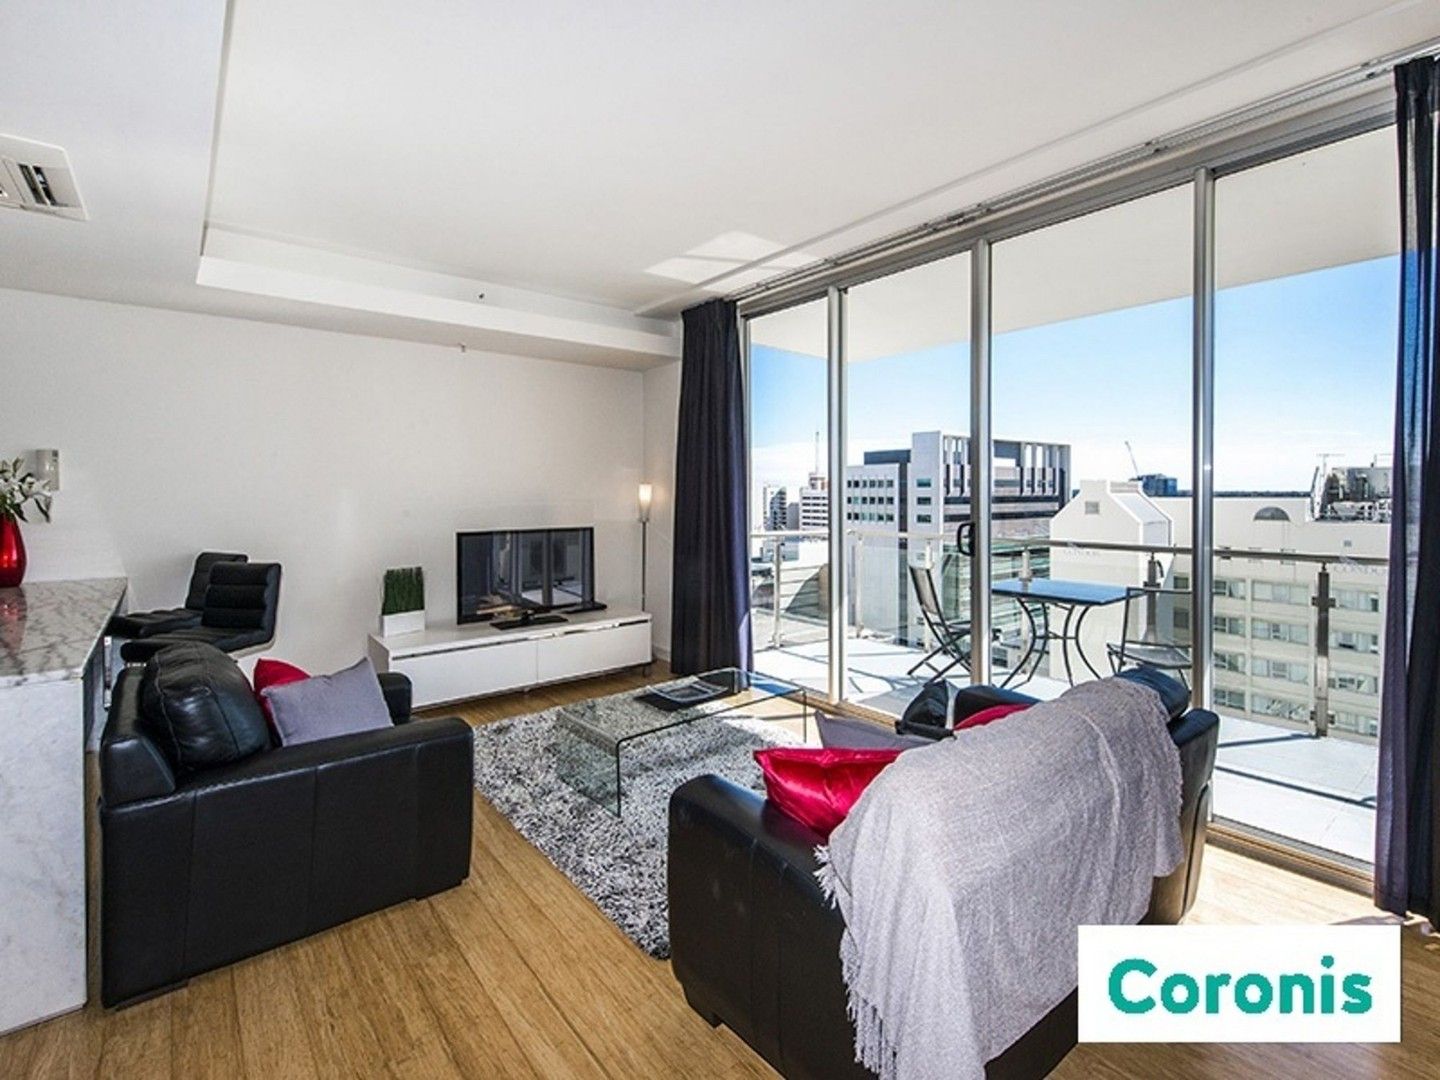 1 bedrooms House in 112/22 St Georges Terrace PERTH WA, 6000